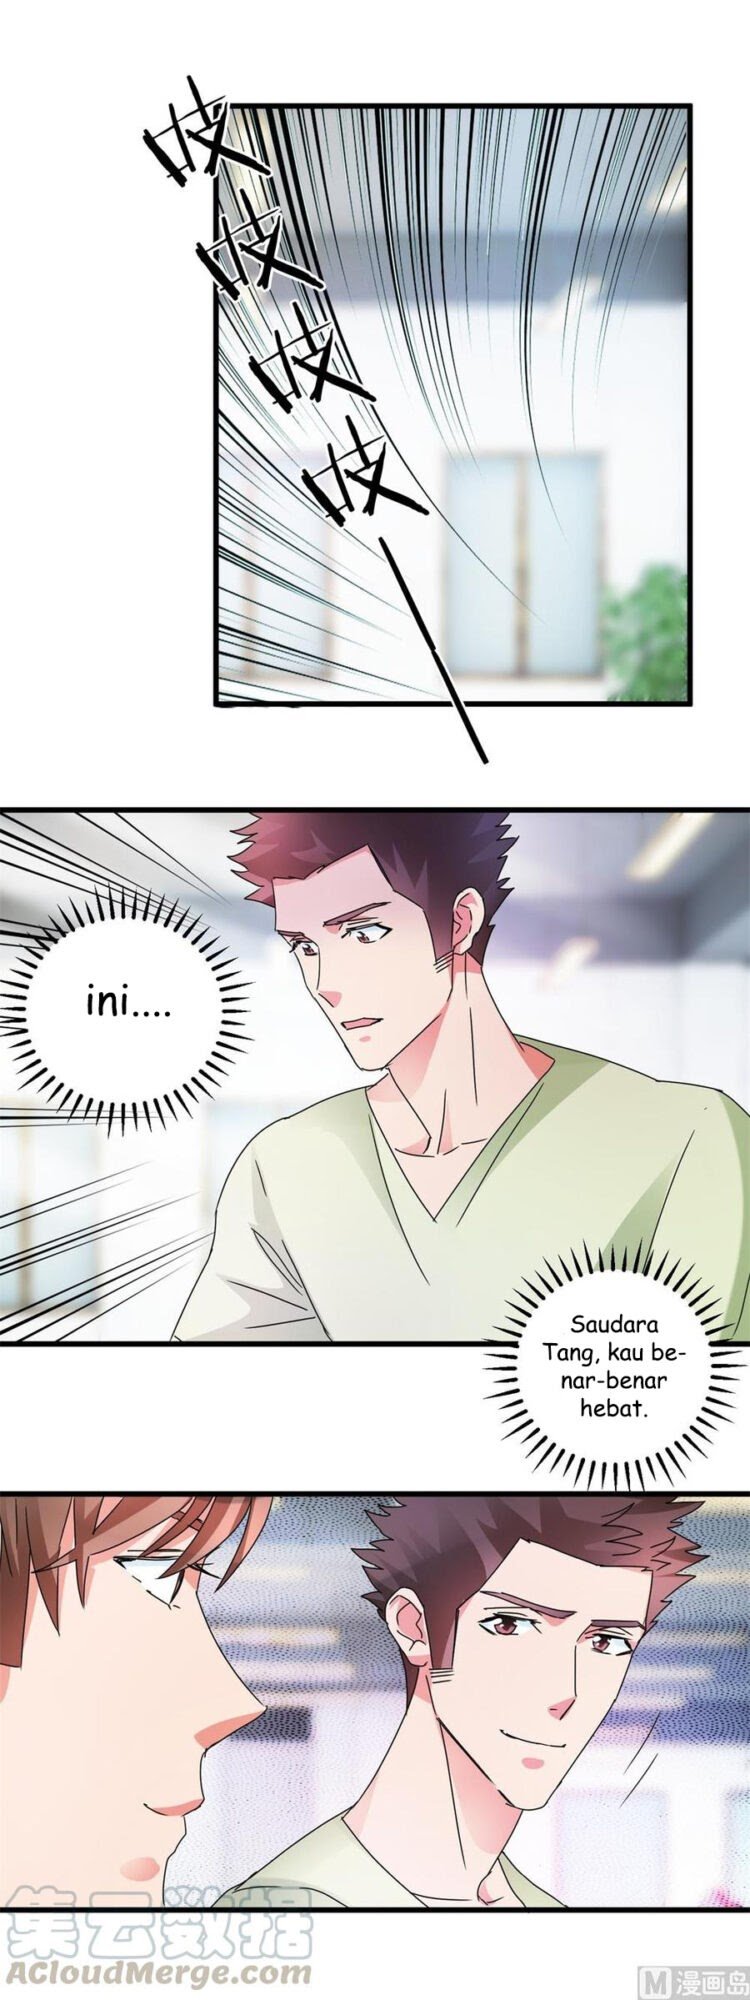 The Immortal Doctor Chapter 29